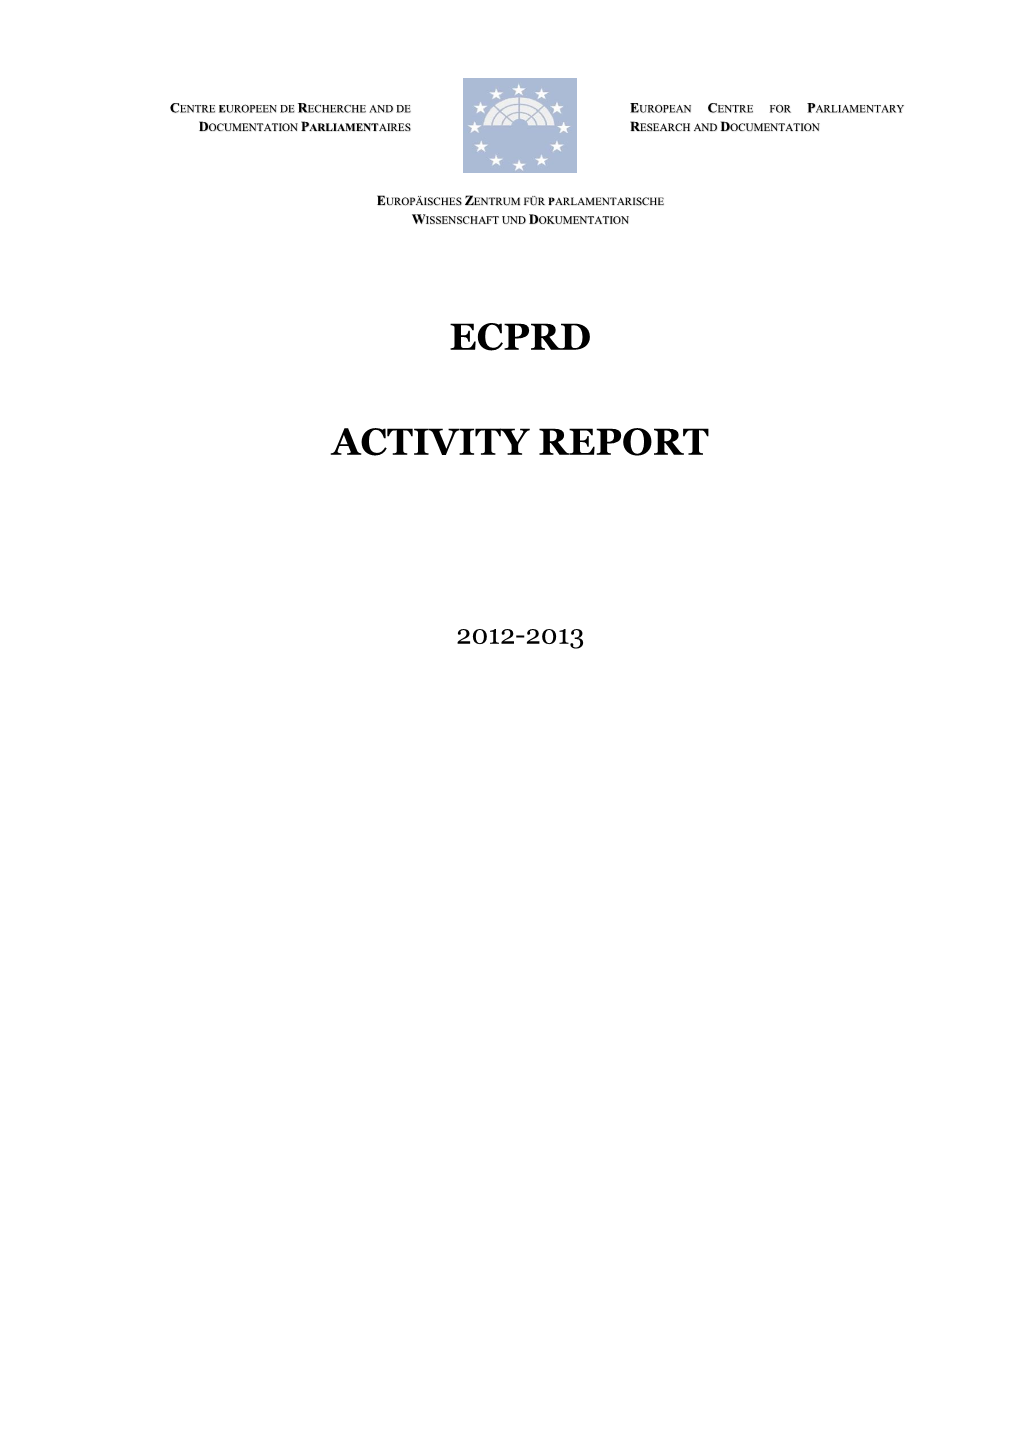 ECPRD Activity Report 2010-2011 and the Priorities and Programme for 2012 and 2013 Without Changes